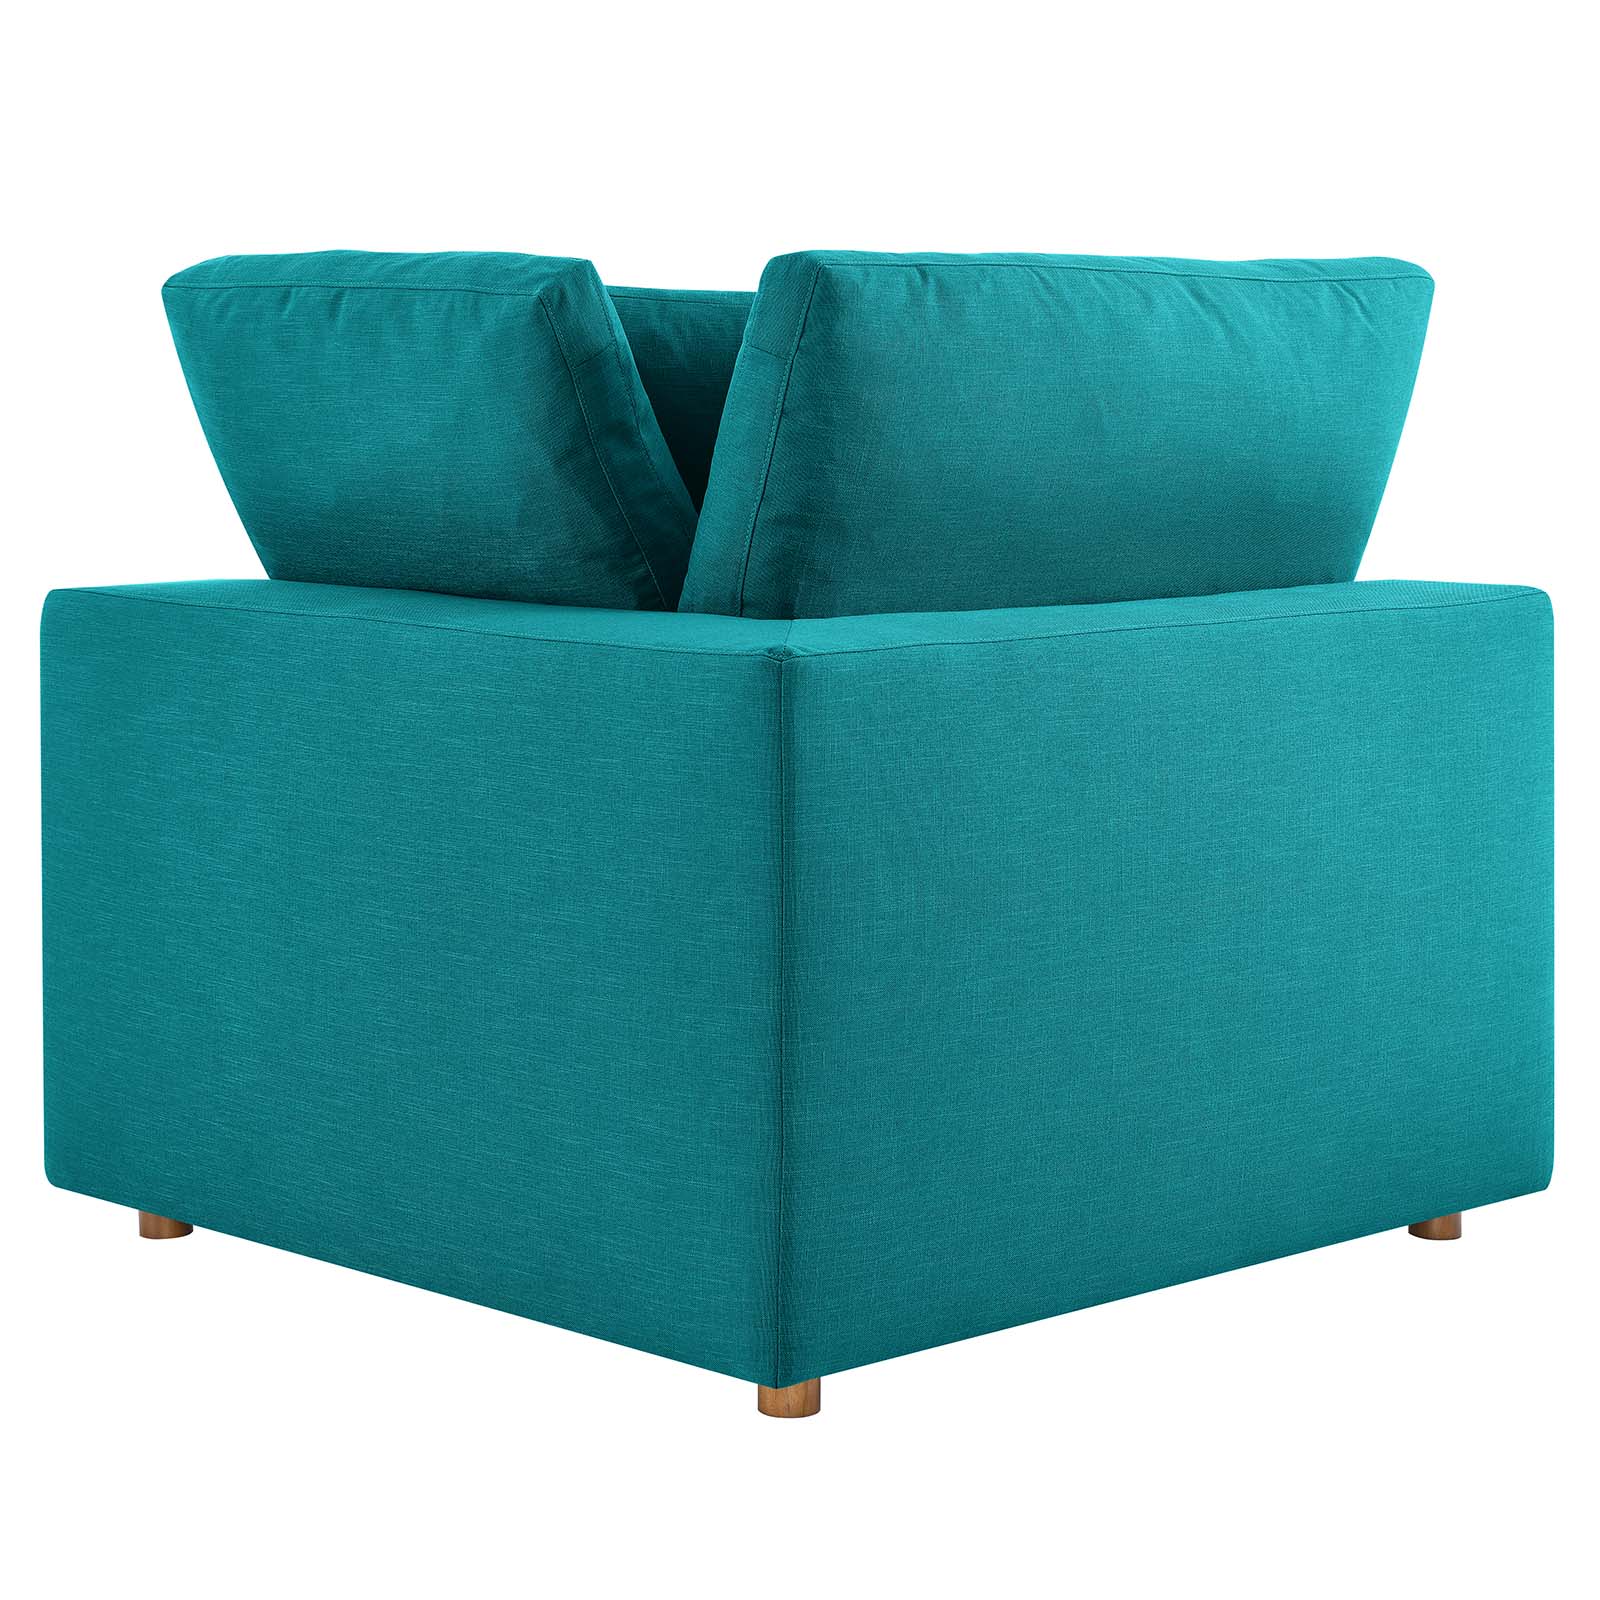 Modway Commix 4-Piece Fabric Down Filled Sectional Sofa Set in Teal - image 4 of 10